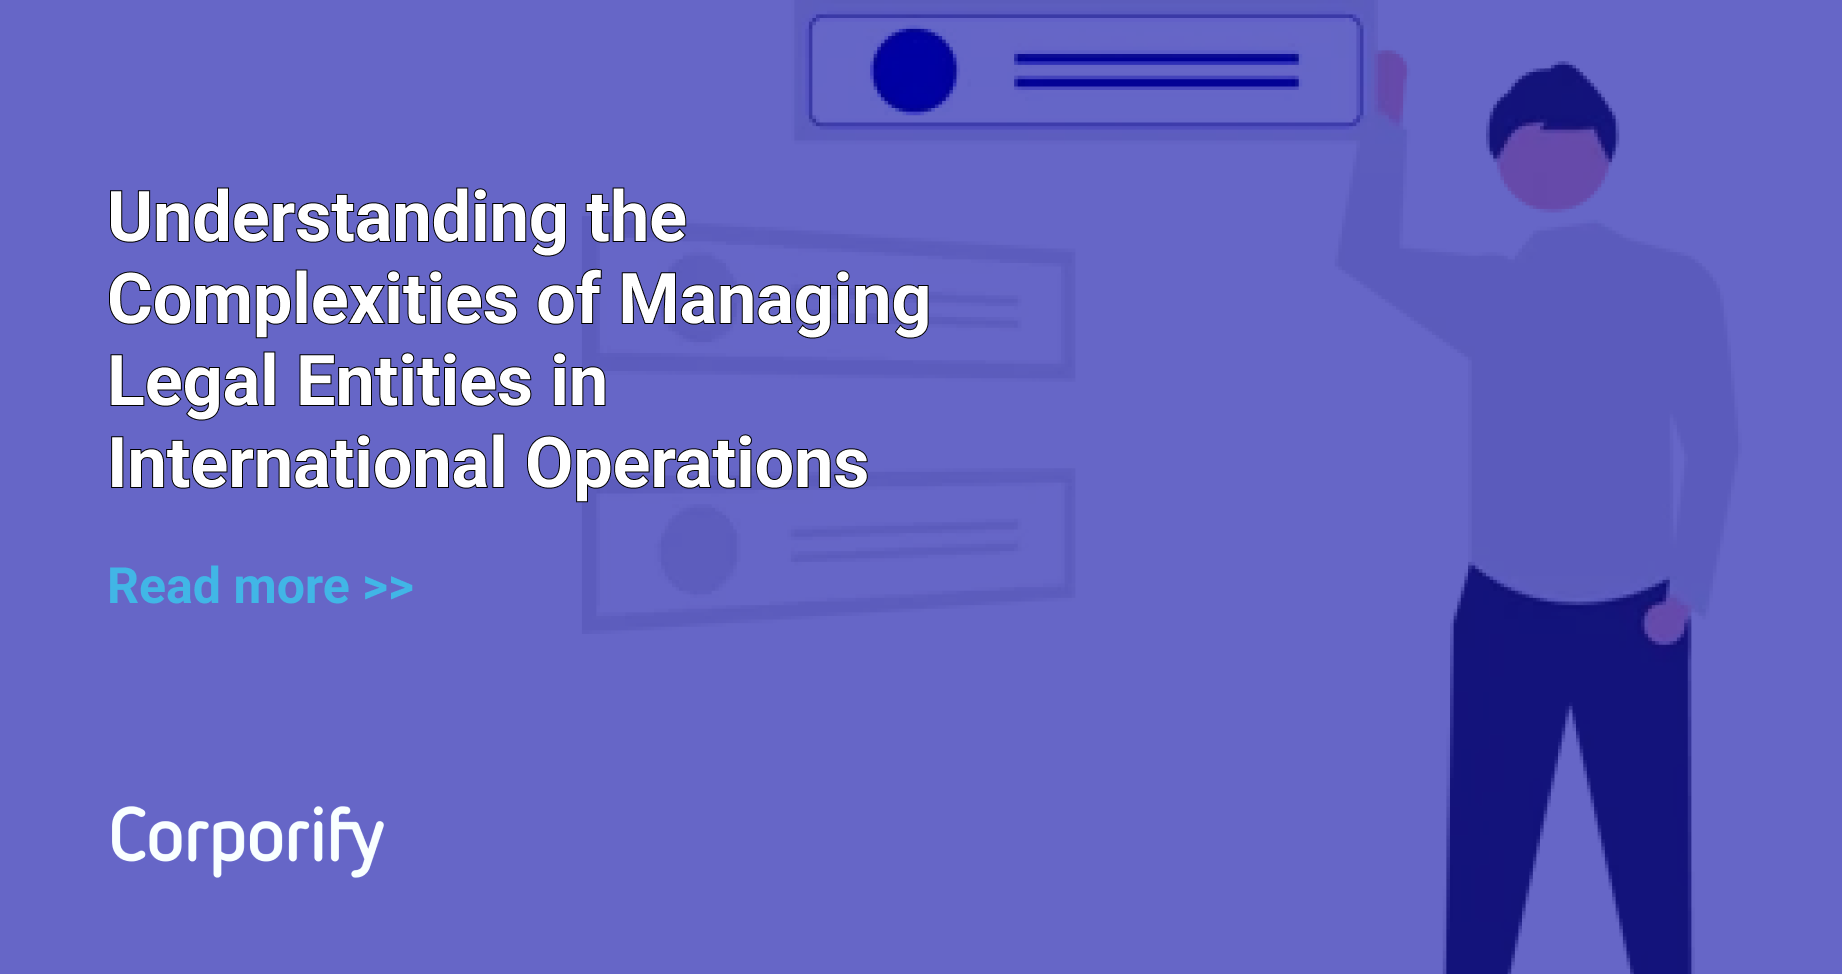 Understanding the Complexities of Managing Legal Entities in International Operations